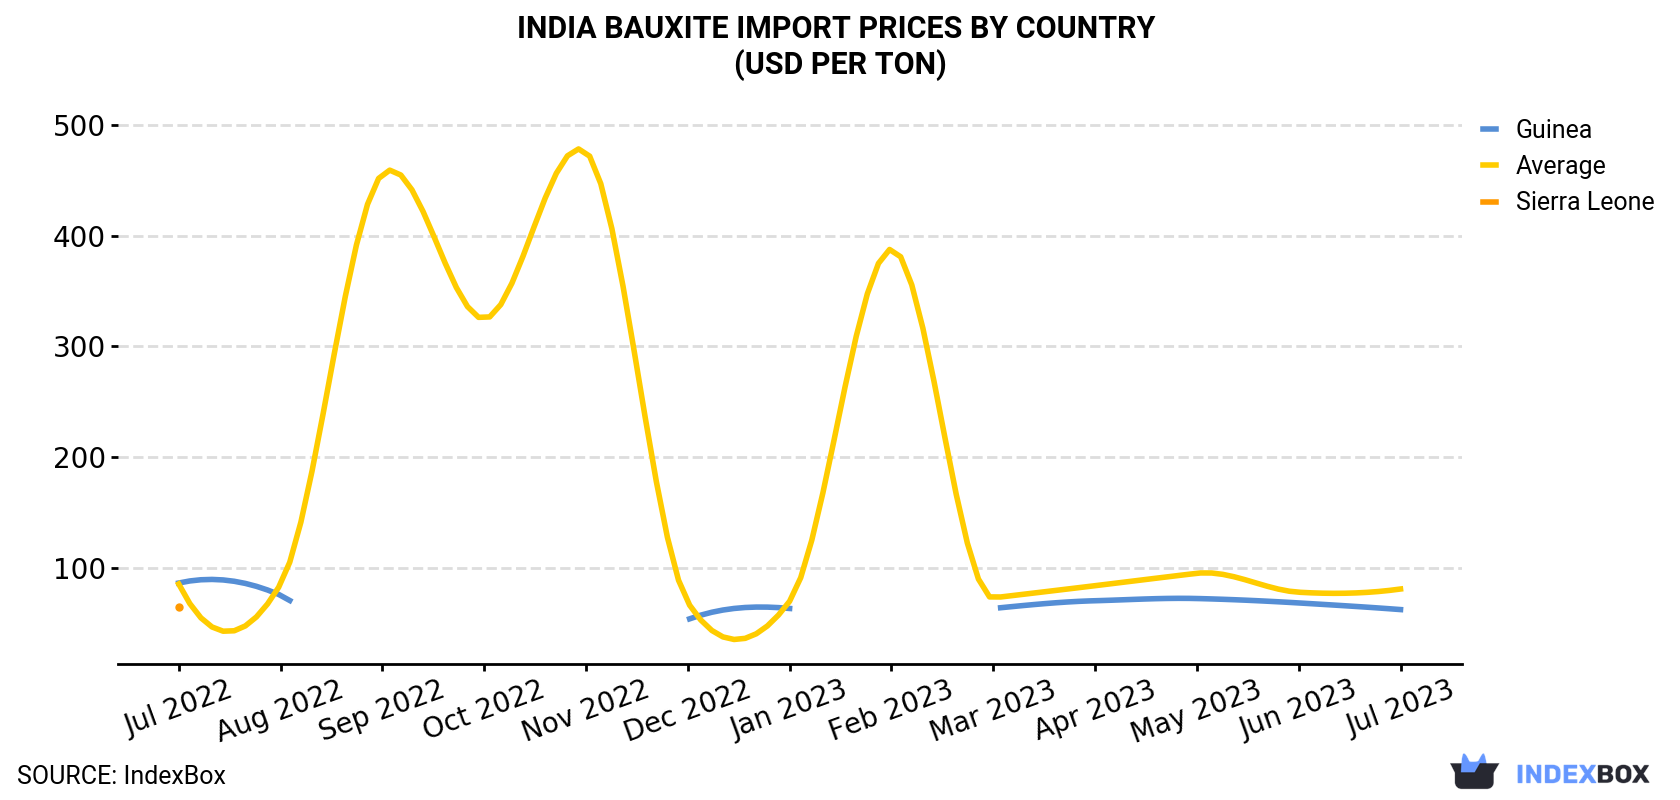 India Bauxite Import Prices By Country (USD Per Ton)